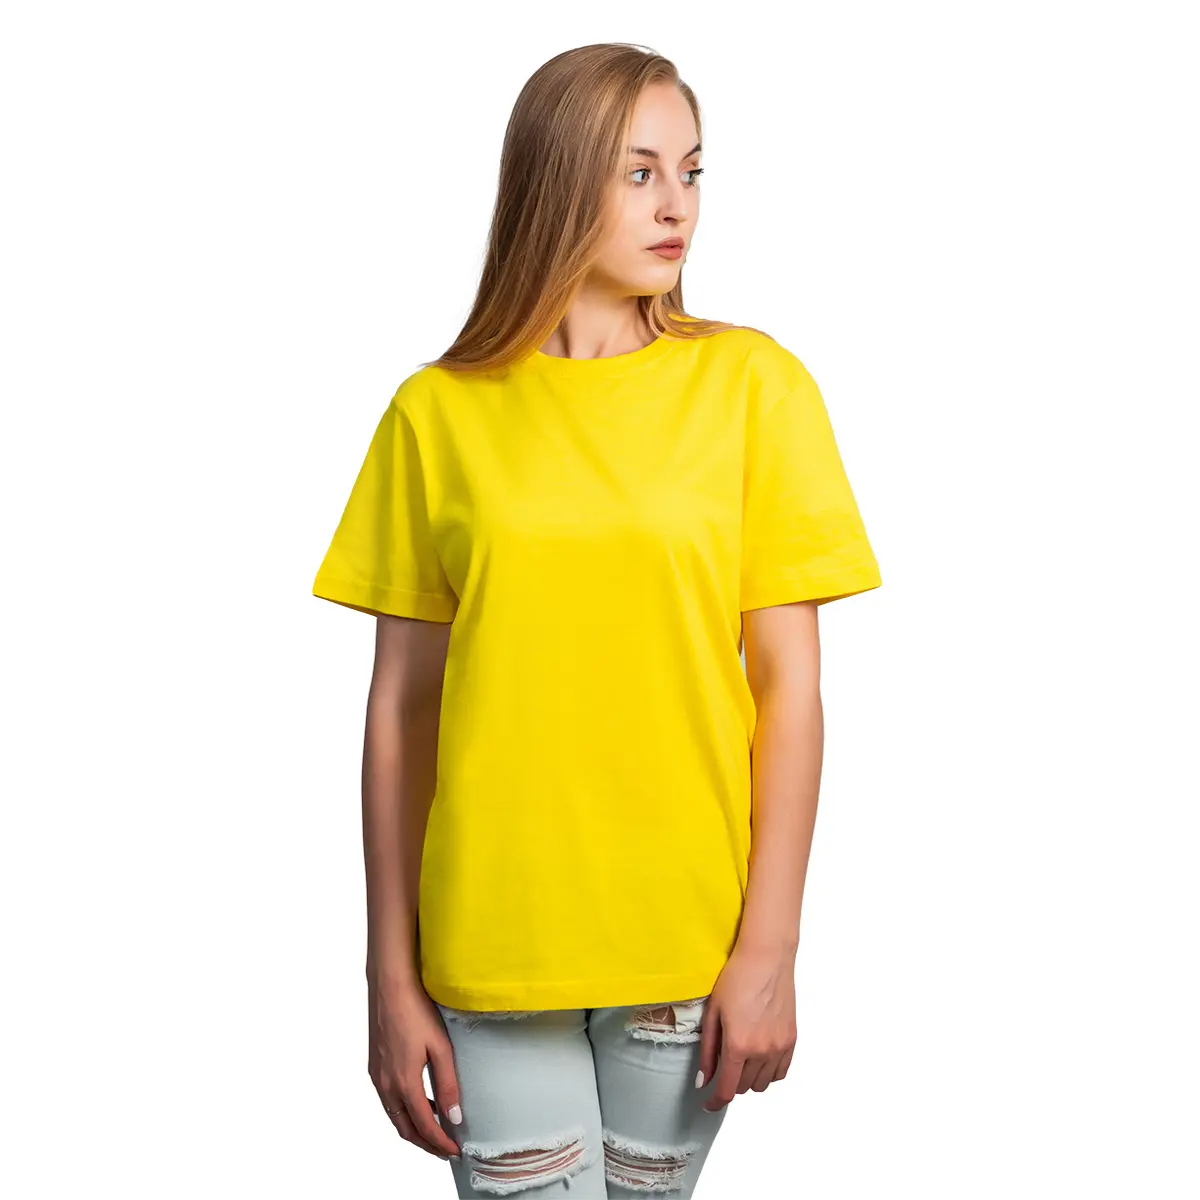 High Quality T-shirts Made Of 100% Cotton From Manufacturer Cotton T-shirts